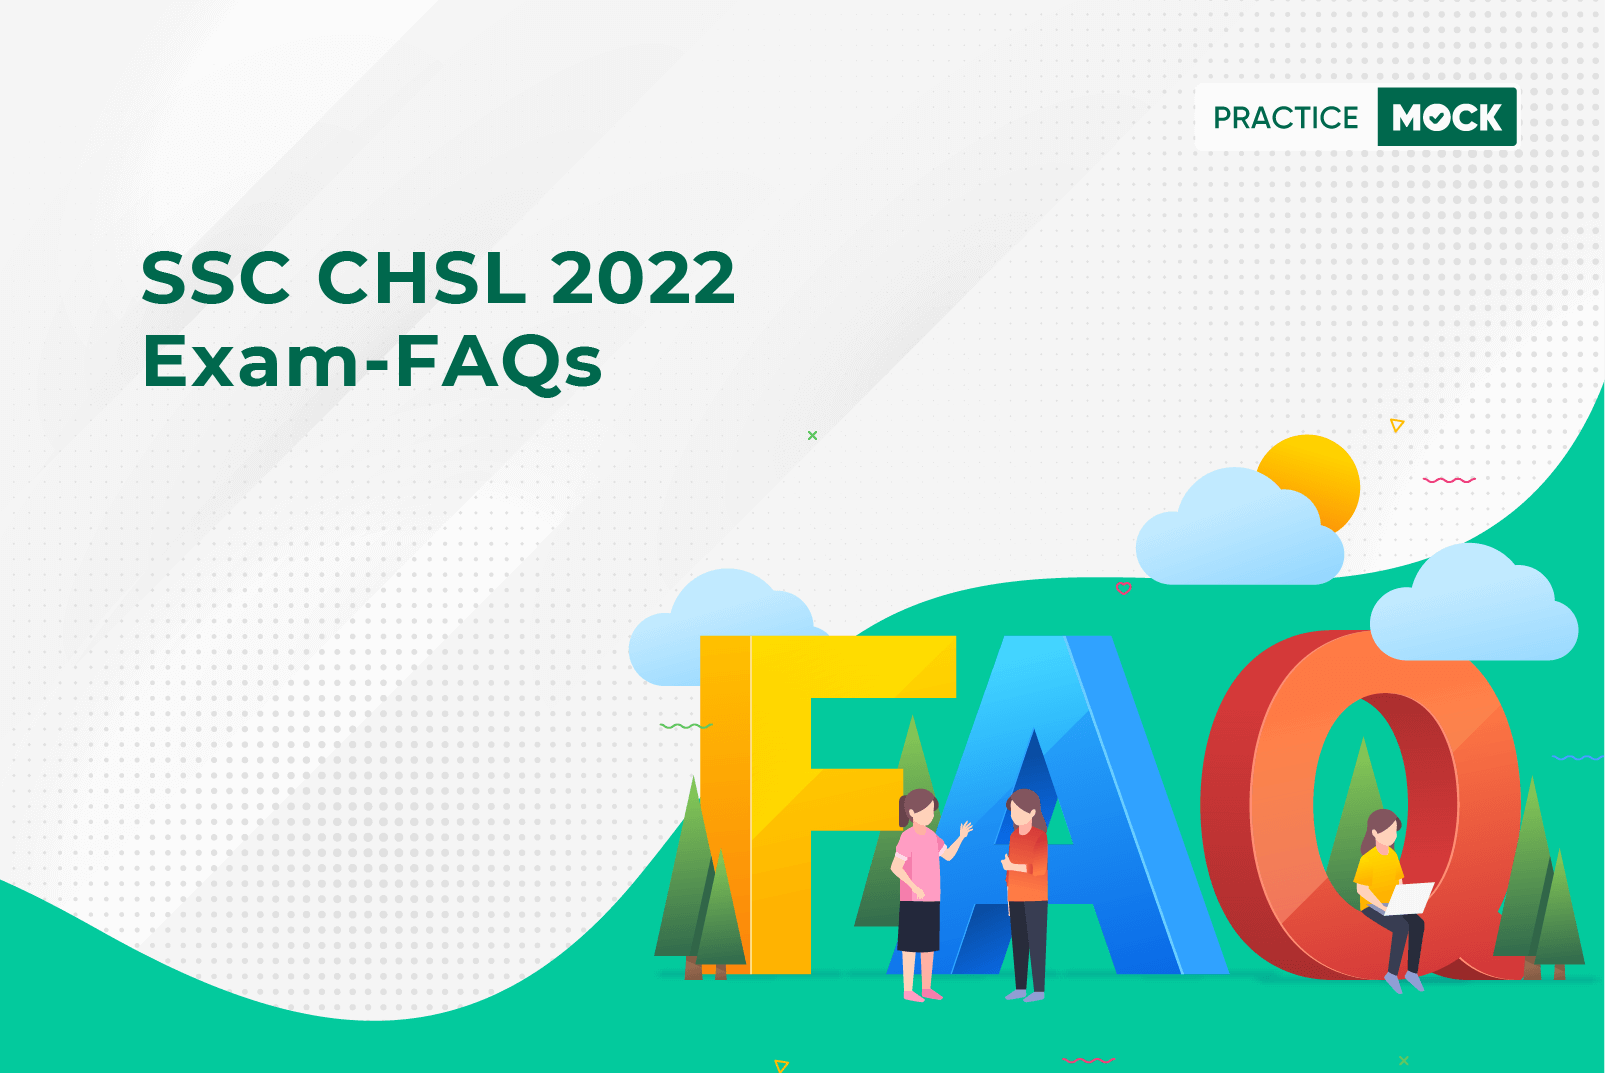 SSC CHSL 2022 Exam-FAQs-Check Eligibility, Salary for LDC/DEO/JSA/PA/SA Vacancies